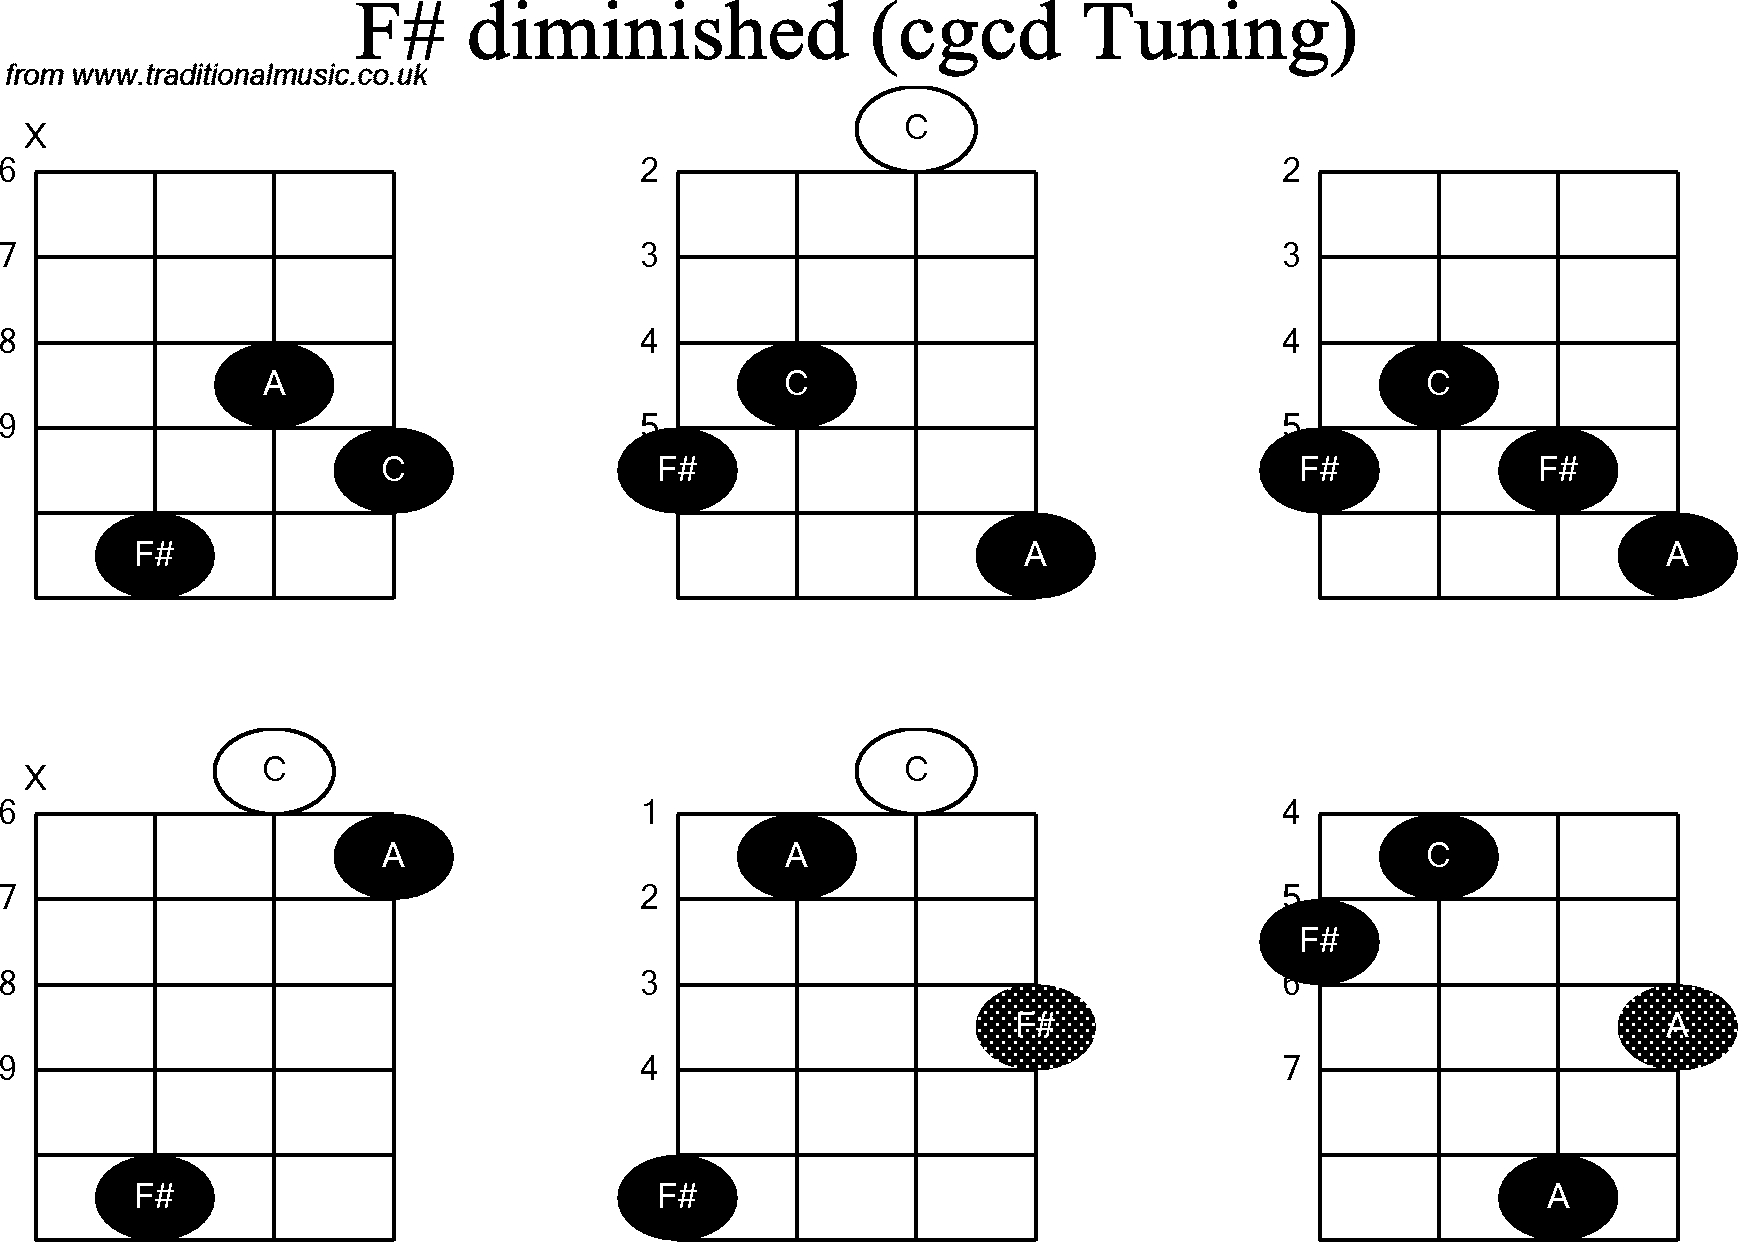 Chord diagrams for Banjo(Double C) F# Diminished